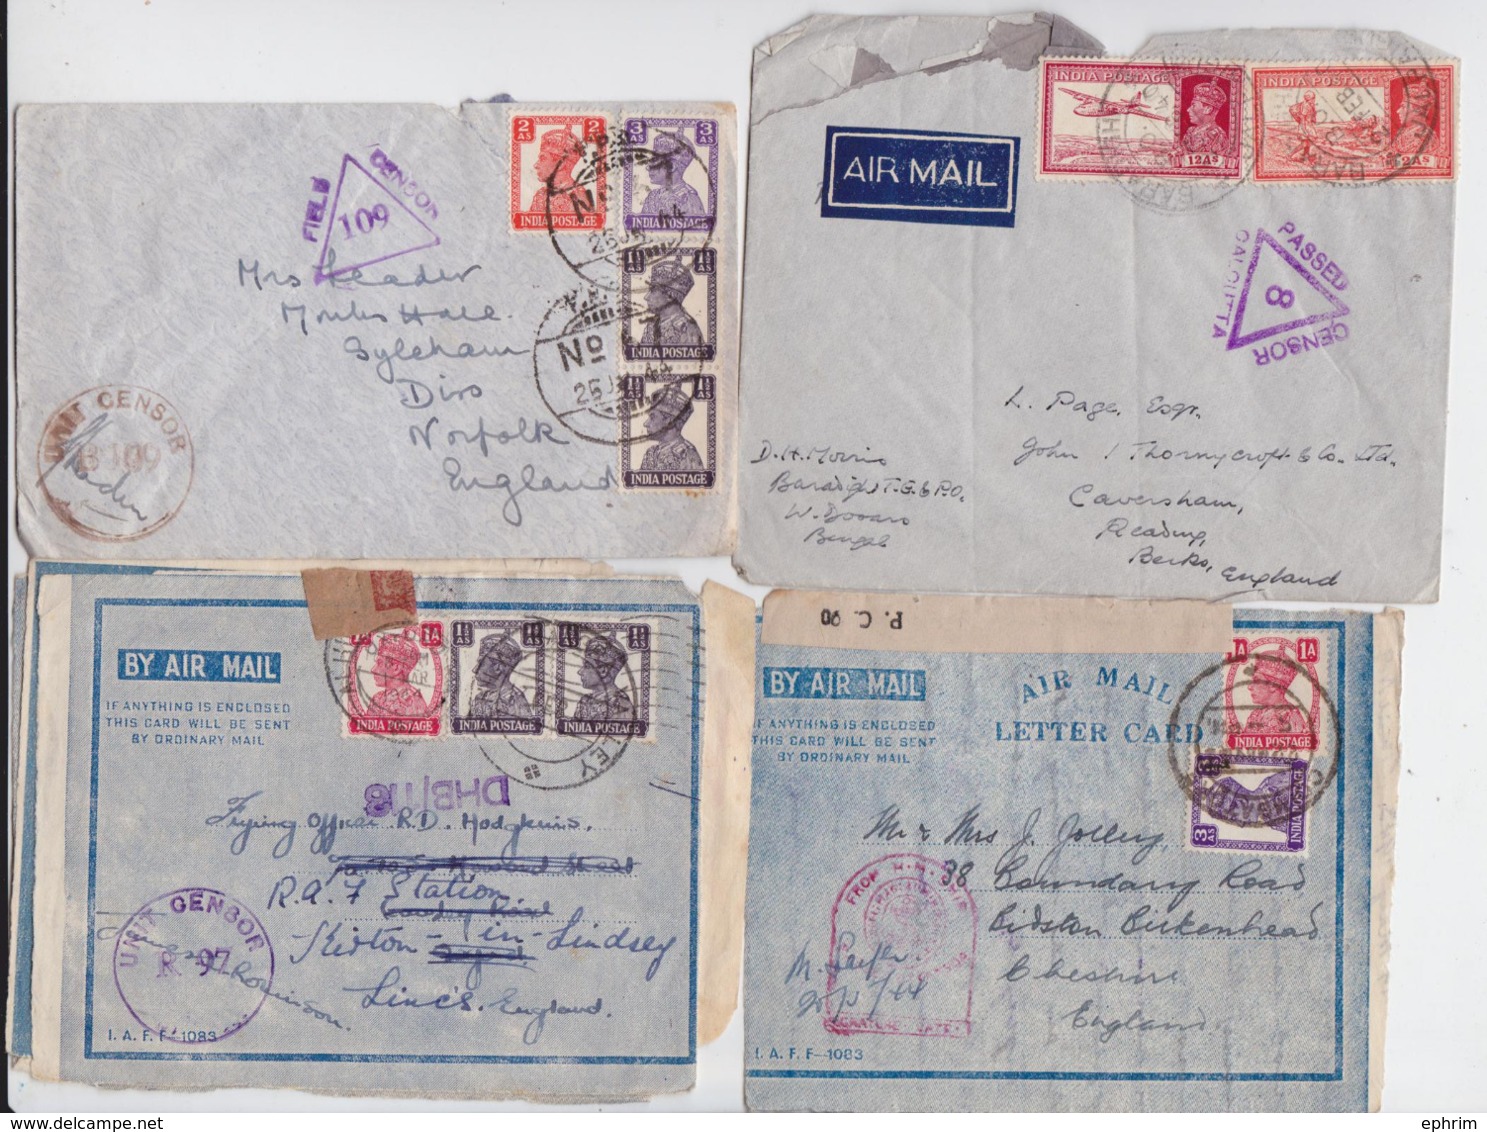 BRITISH INDIA RAJ POSTAGE INDE CENSURE LOT OF 23 AIR MAIL COVER UNIT FIELD CENSOR WW2 LETTER ENVELOPE ON ACTIVE SERVICE - 1936-47 Roi Georges VI